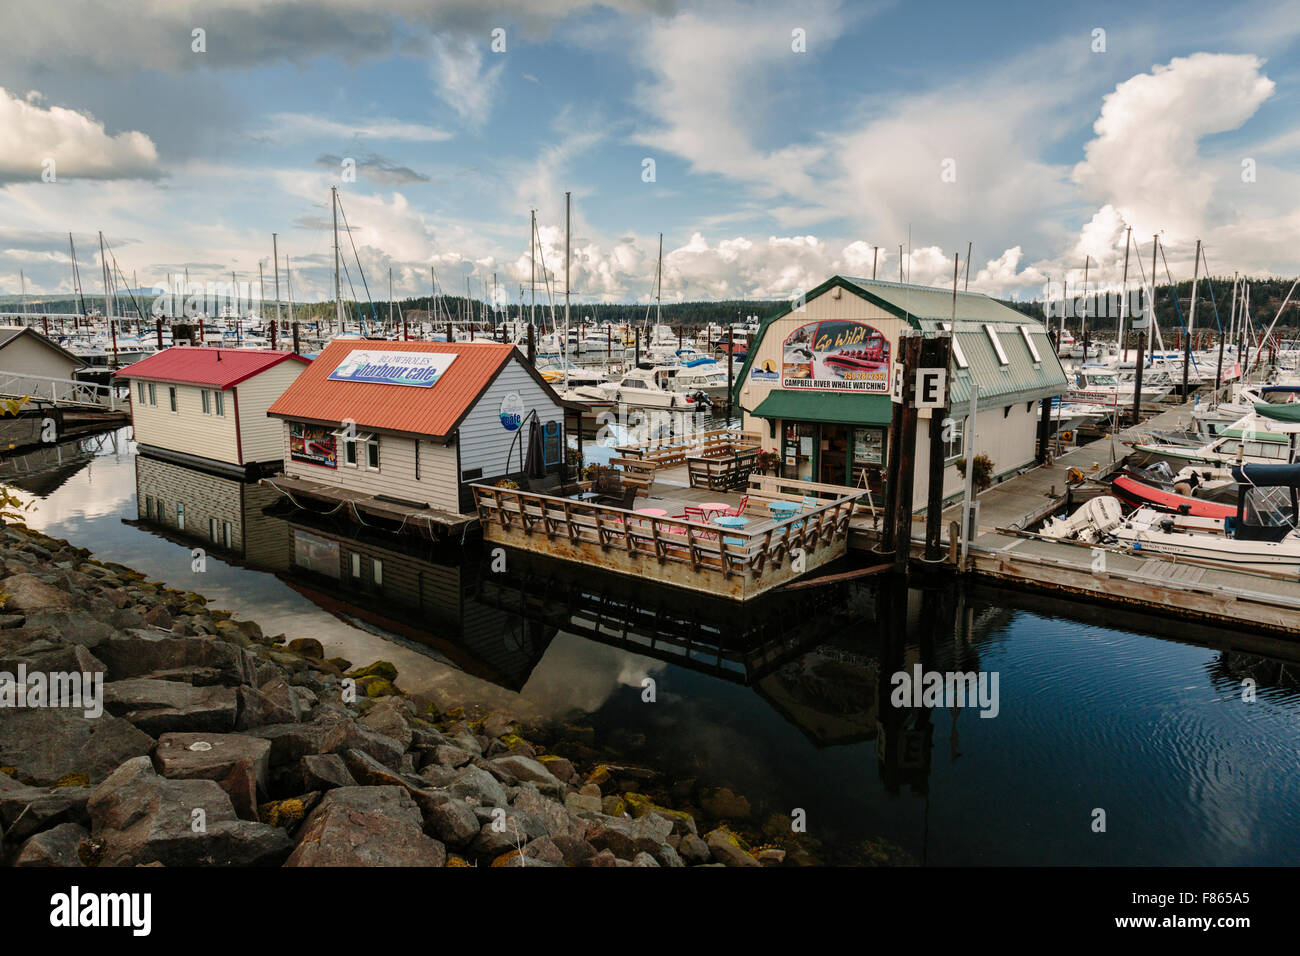 Boats in a harbor, Campbell River, Vancouver Island, British Columbia, Canada Stock Photo